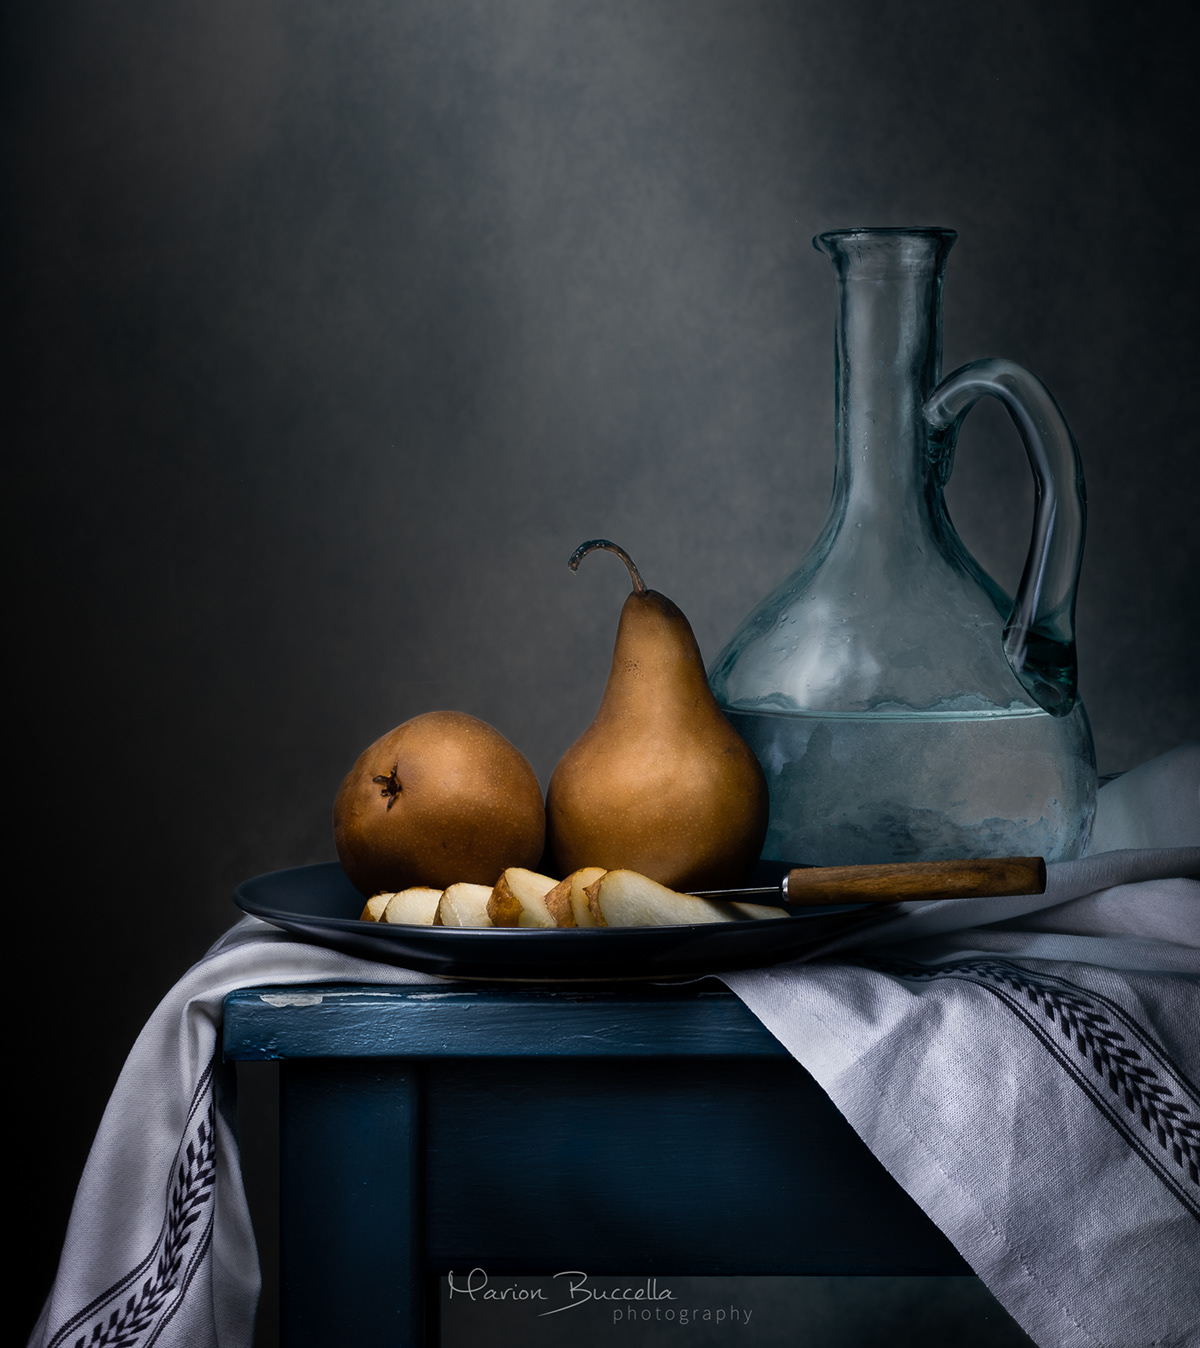 Marion Buccella Photography - Table Top Still Life